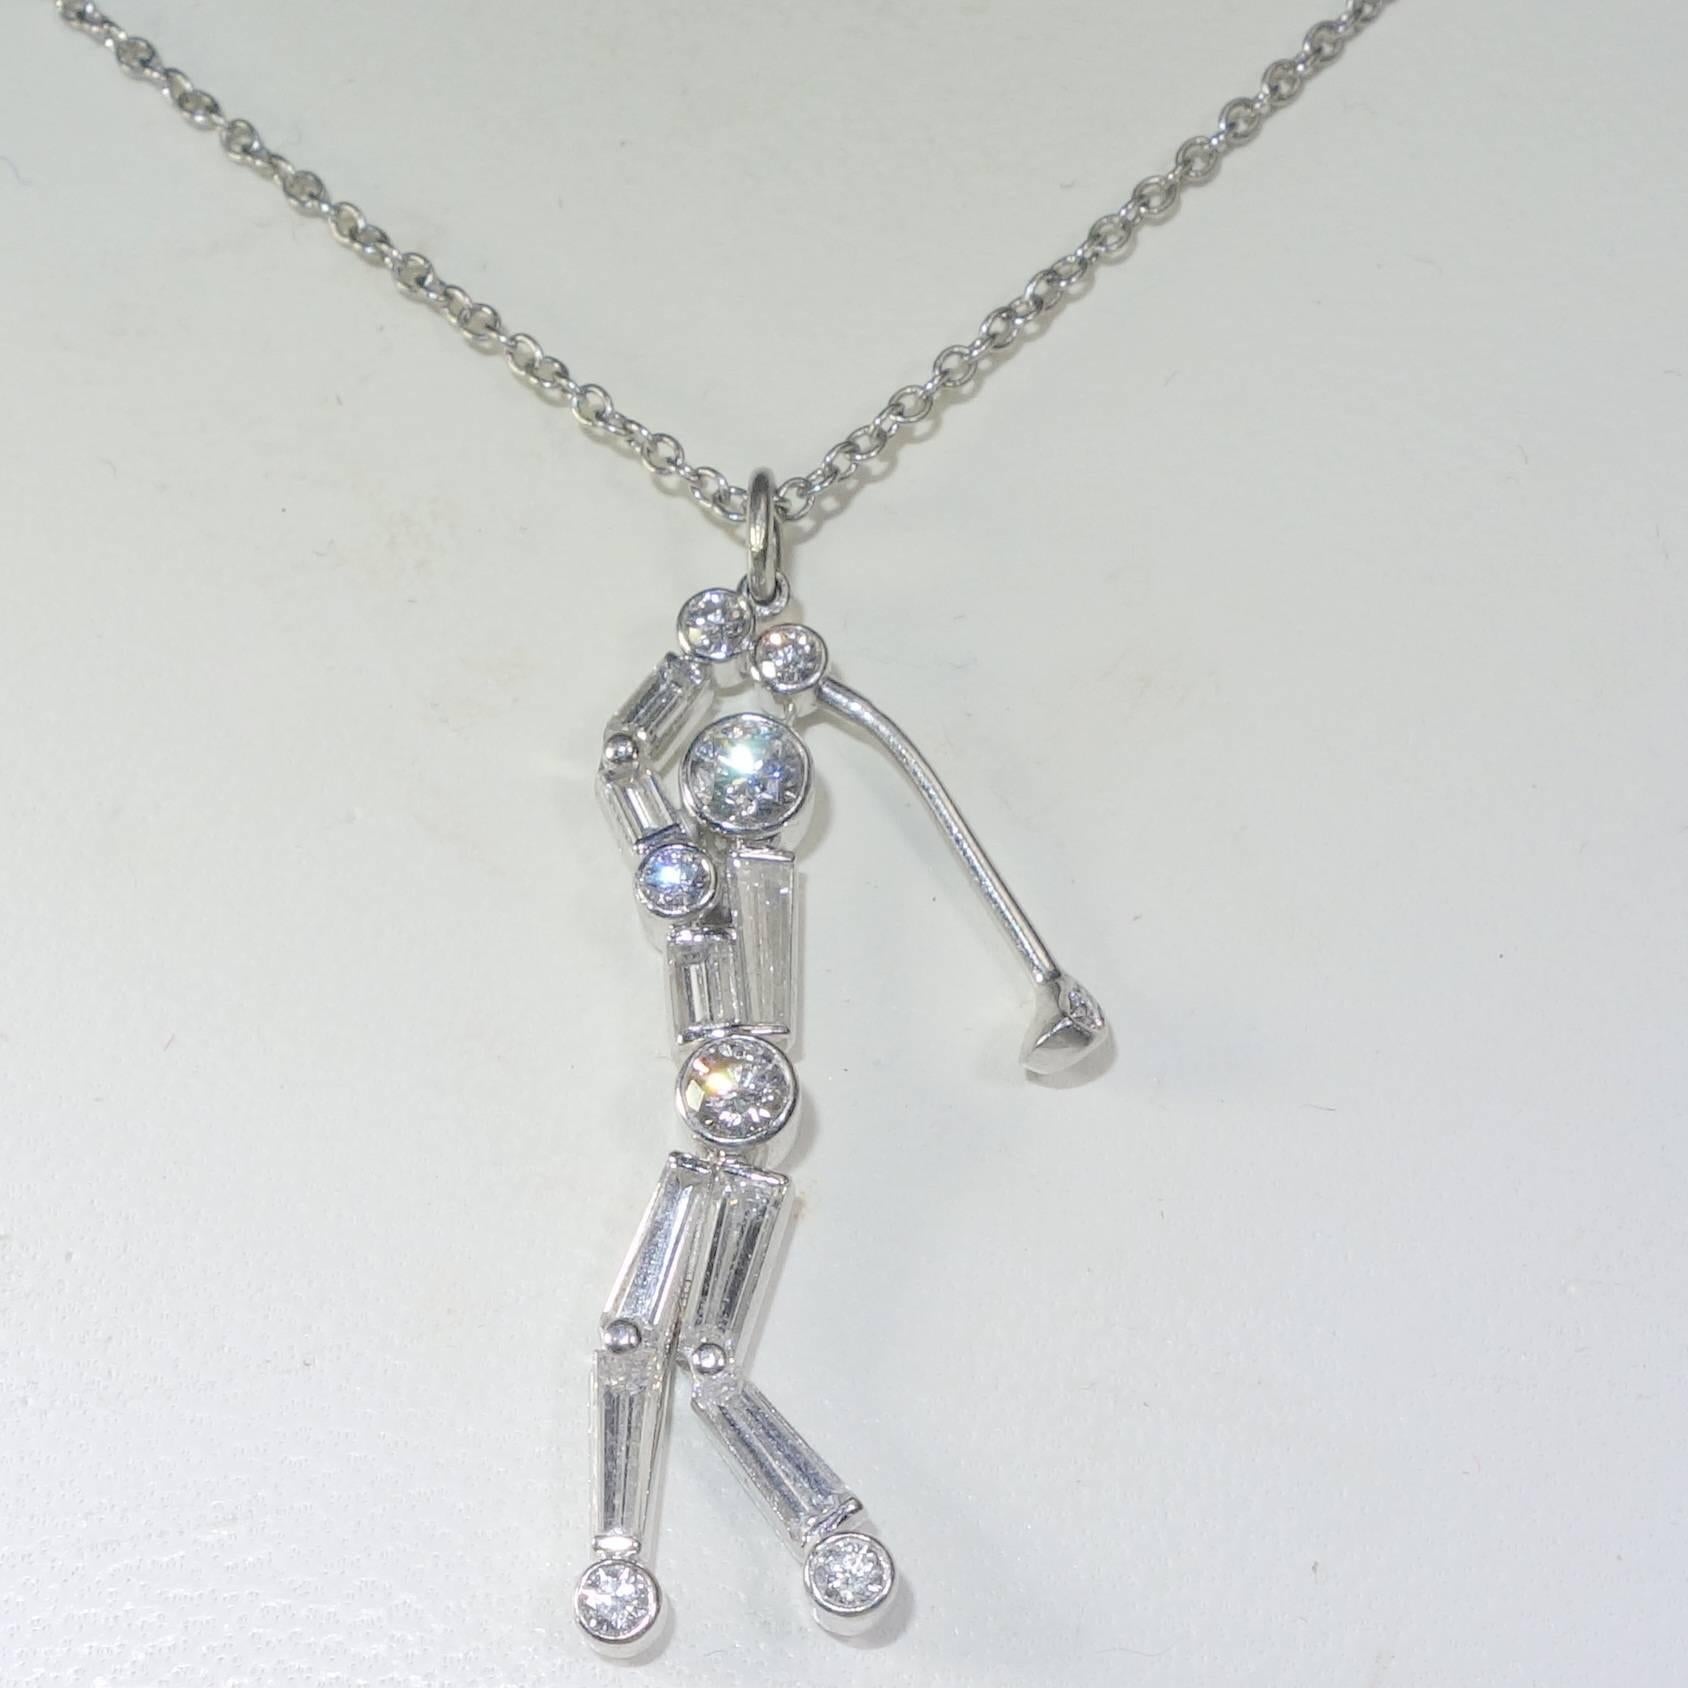 Platinum necklace with fancy cut diamonds and round diamonds.  There are .91 cts. of diamonds which include baguette cut diamonds, tapered baguette and round brilliant cut diamonds.  These fine white stones are F/G (colorless to near colorless),